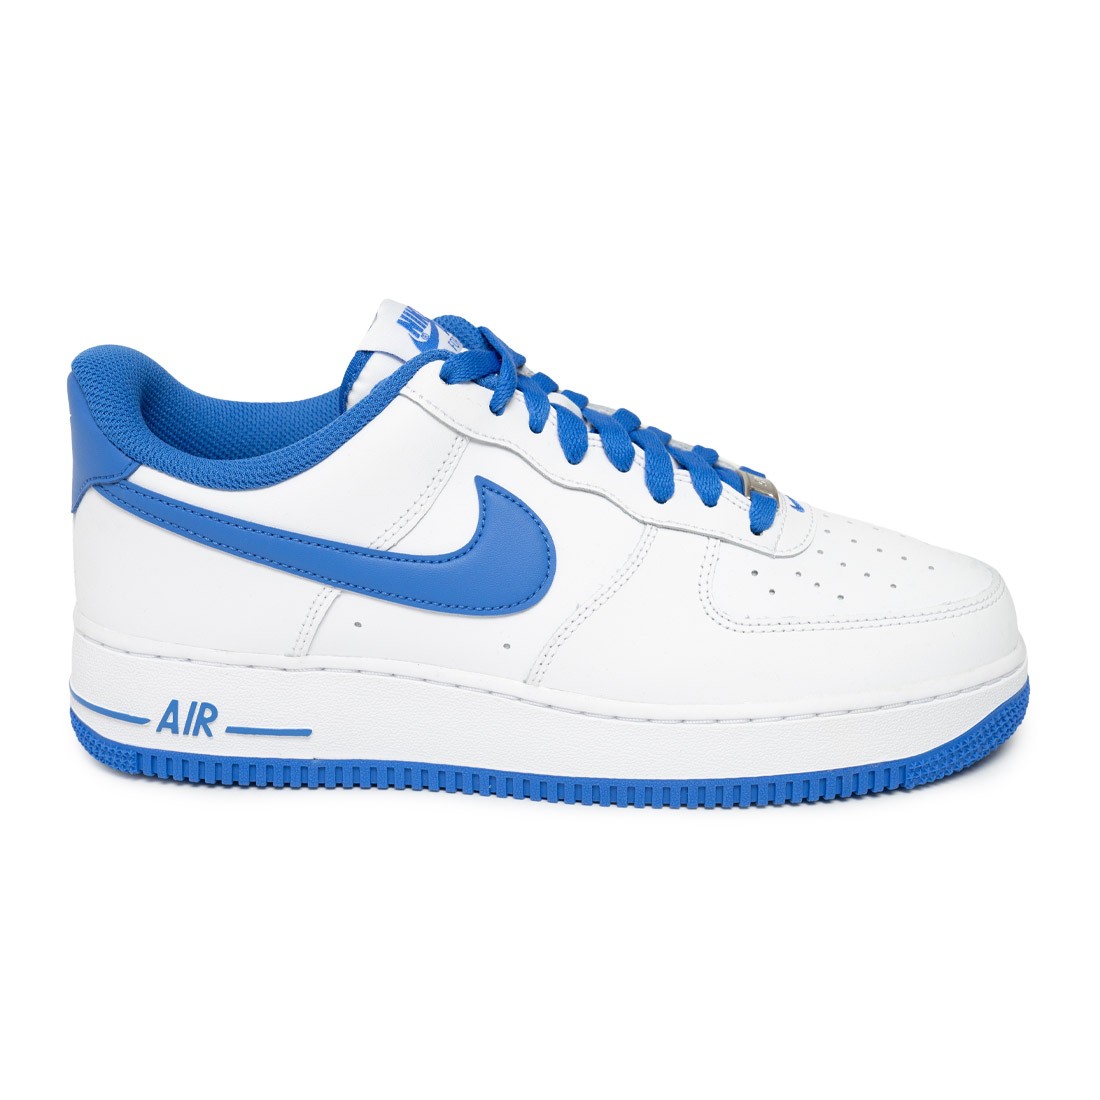 Leve Cambiarse de ropa detección nike air flight 2013 blue bloods list of time cast